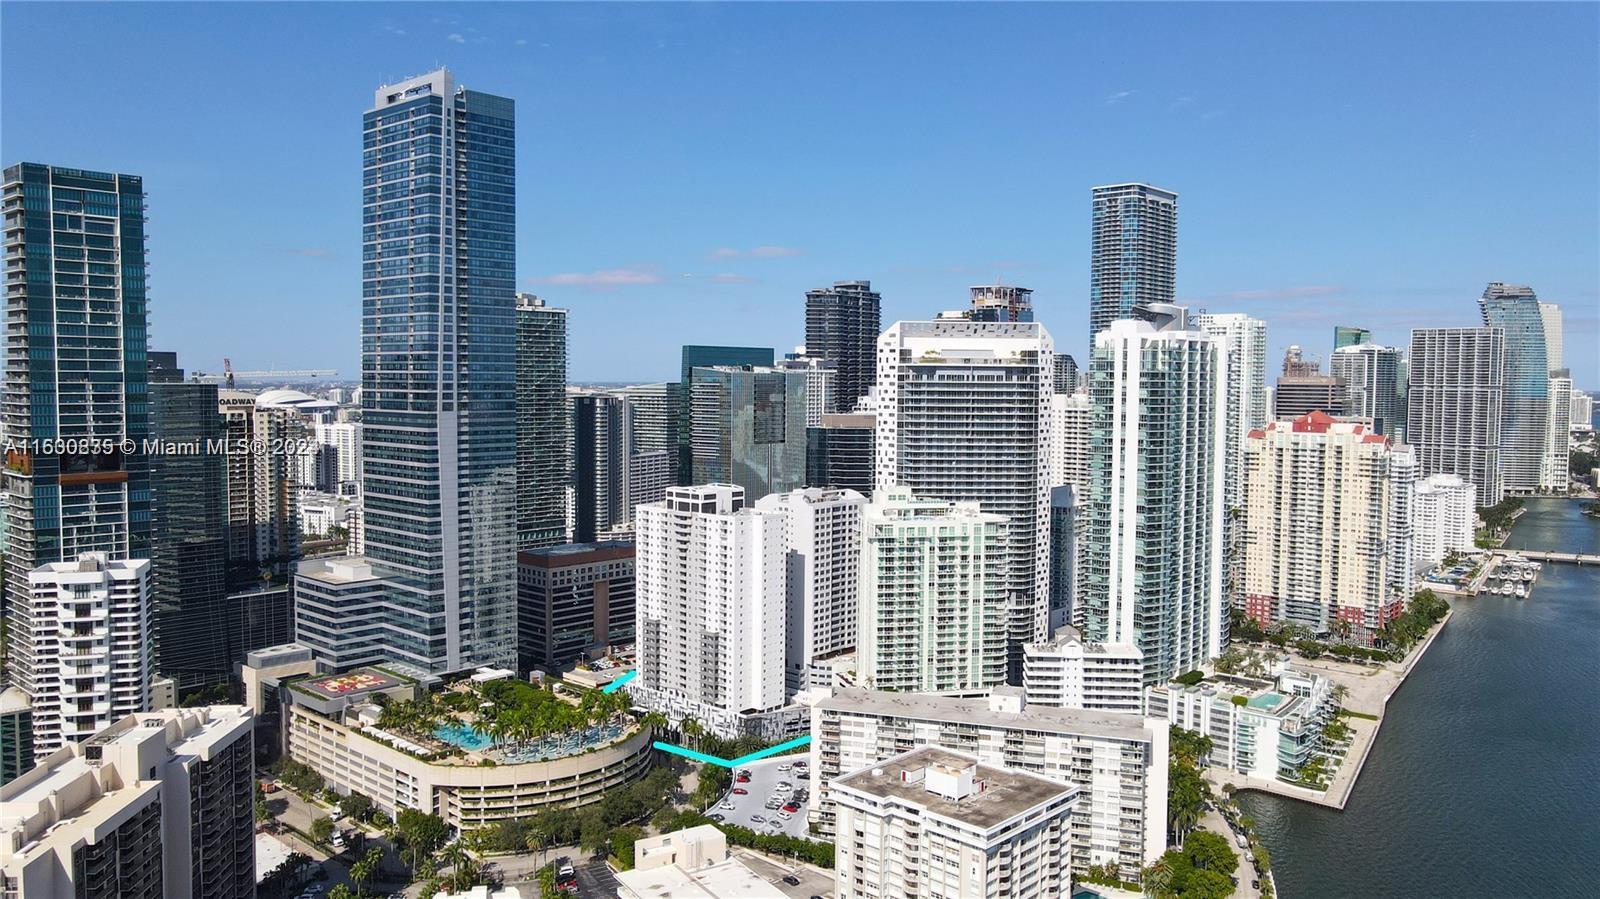 Gorgeous Fully Furnished 2Bed/2Bath Condo in the Heart of Brickell. This Condo Features Wood Floors Throughout, Great Views of Brickell and Downtown Miami, Modern Furniture and Much More. Washer/Dryer in Unit. Building Features Community Pool, Fitness Center with Sauna and Steam Room, Clubhouse with Kitchen, WiFi, On Site Restaurant and The List Goes On and On. Location Offers Easy Access to All Major Roadways, Shopping, Nightlife, Dining, Public Parks and Public Transportation. Don't Miss This Gem!